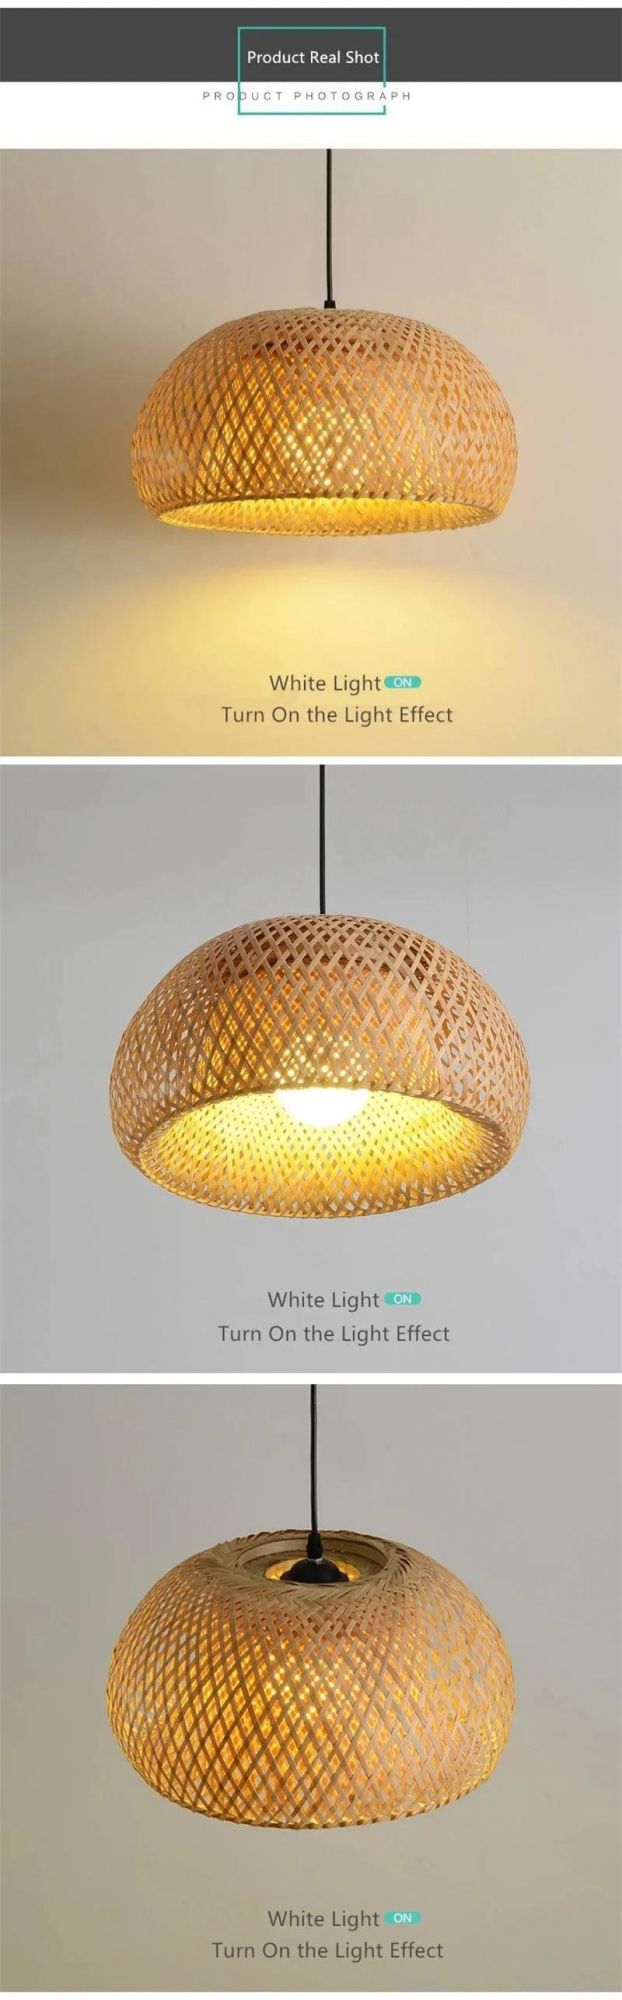 Bamboo Lantern Pendant Lamp Natural Rattan Wicker Chandeliers Hand-Woven Bamboo Lampshades E27 Lighting Fixtures Hanging Light